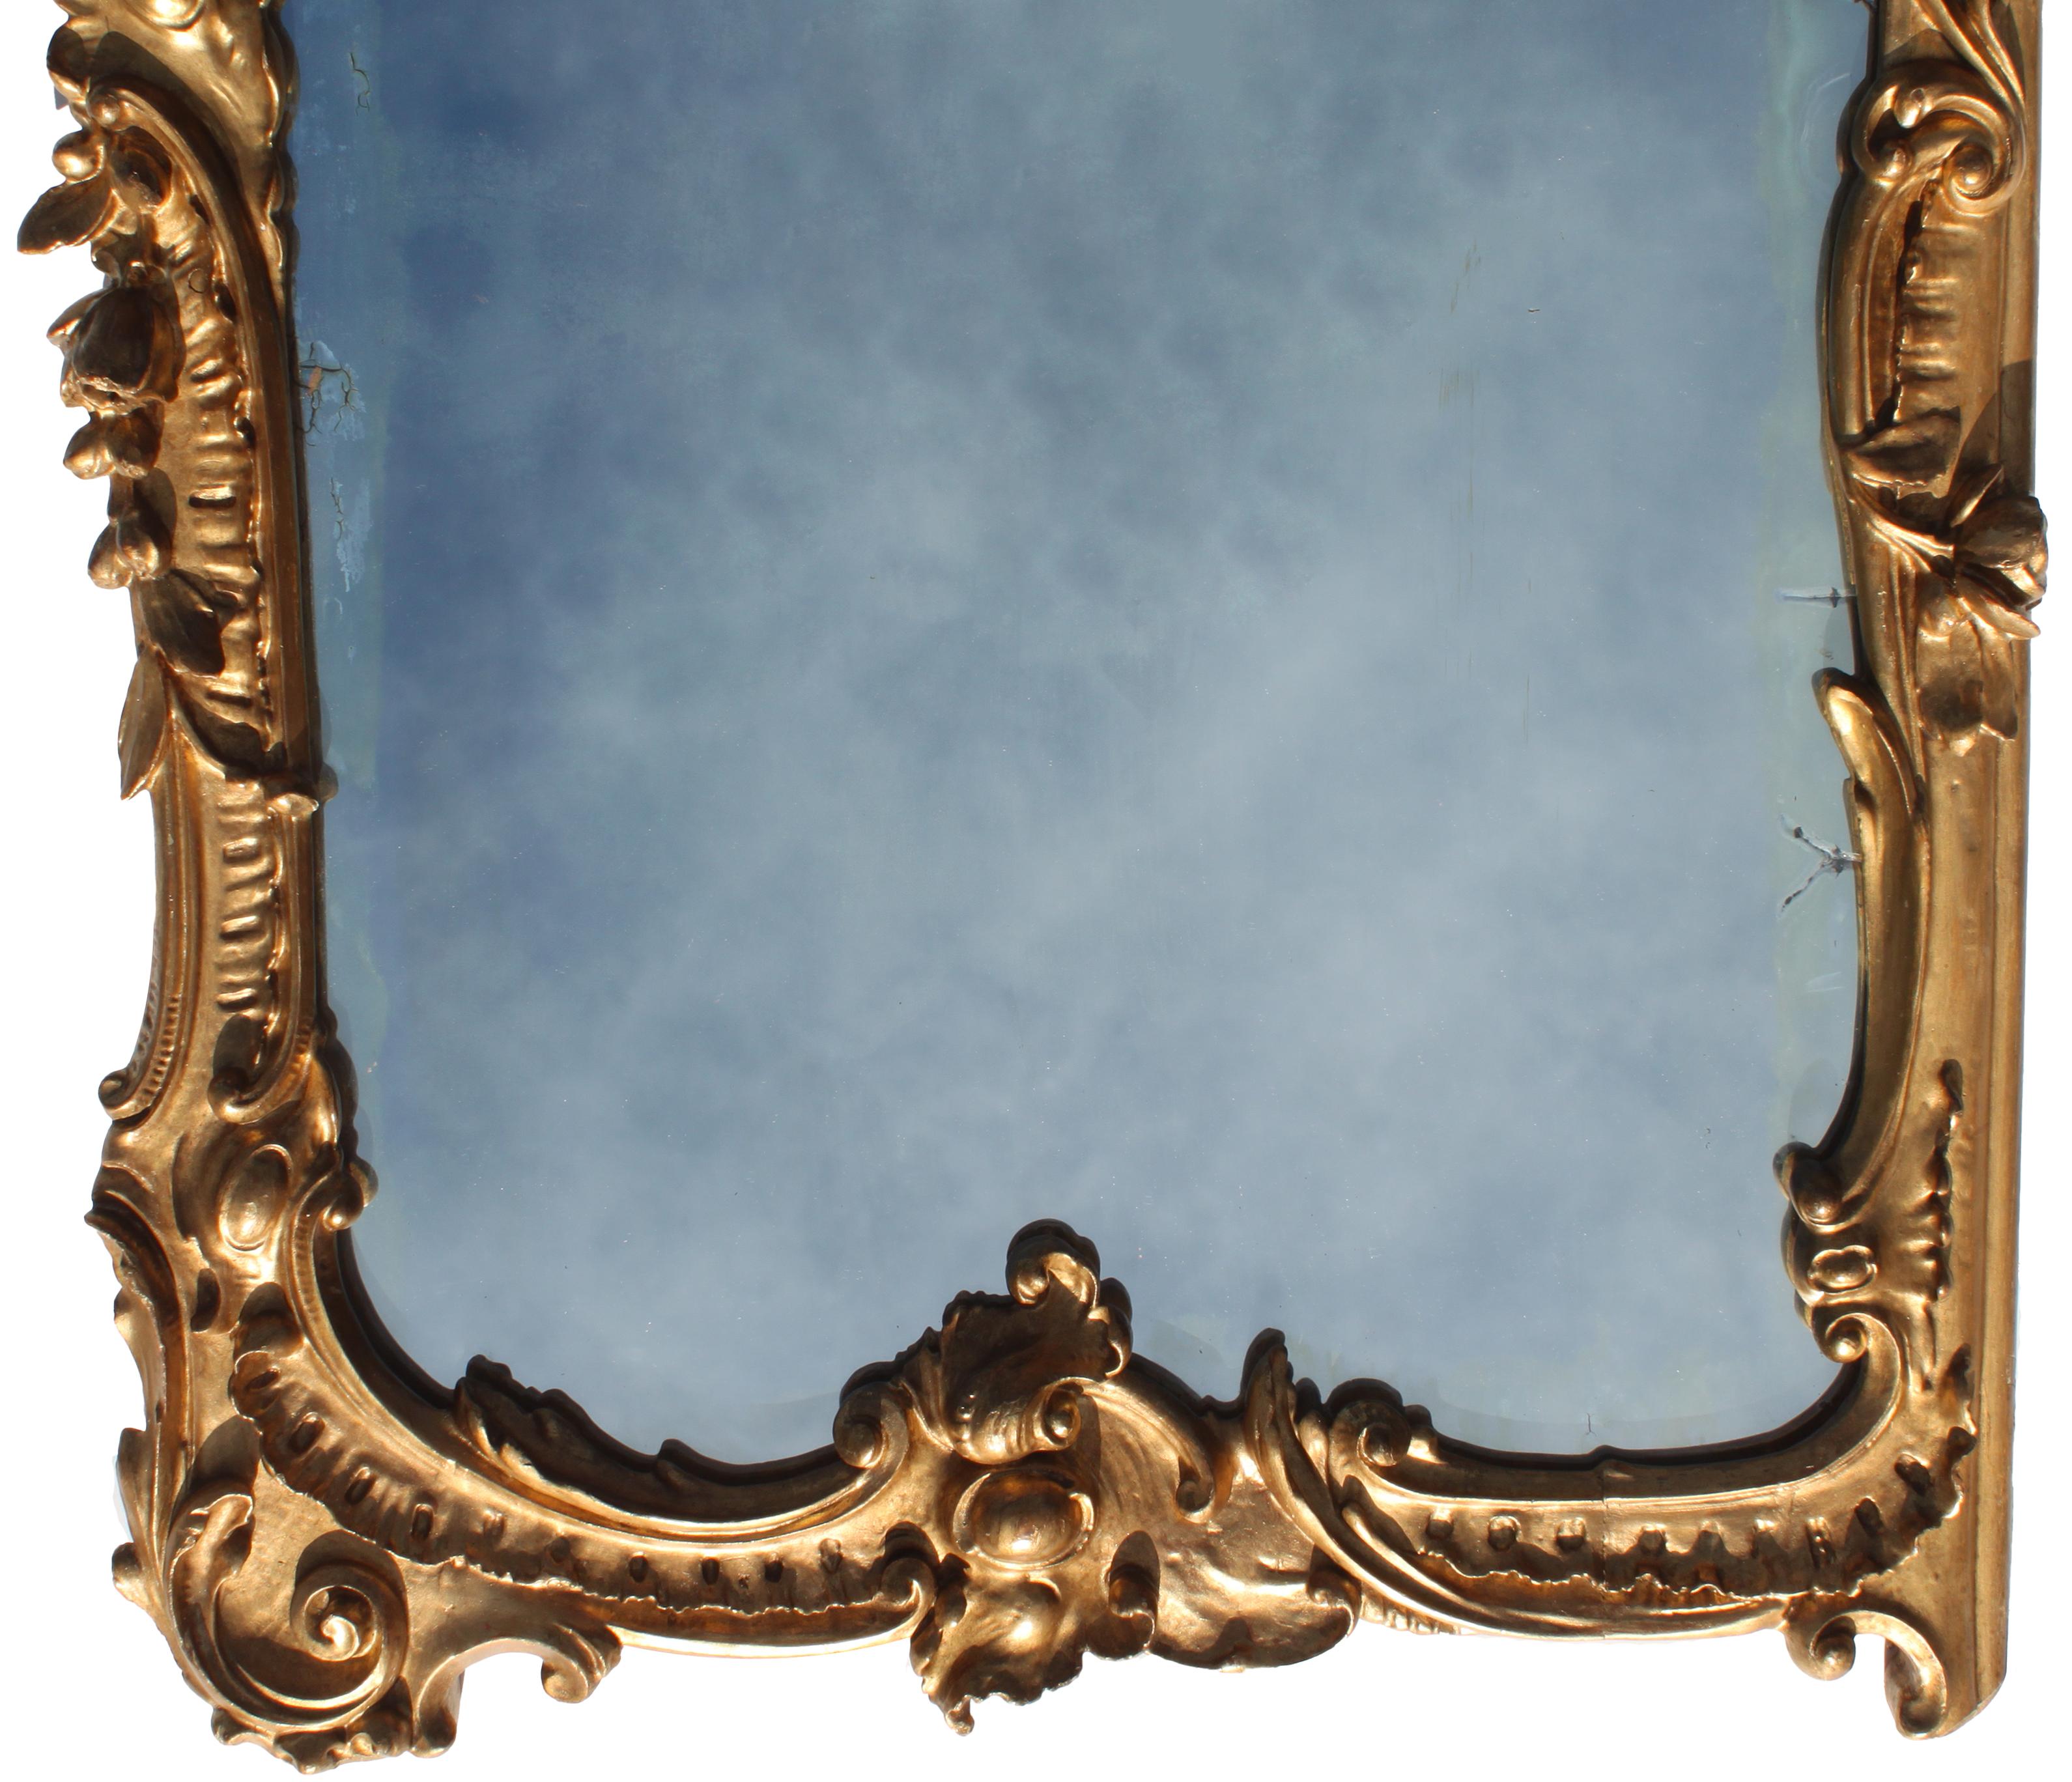 Whimsical French 19th-20th Century Belle Époque Gilt-Wood Triptych Putti Mirrors For Sale 5